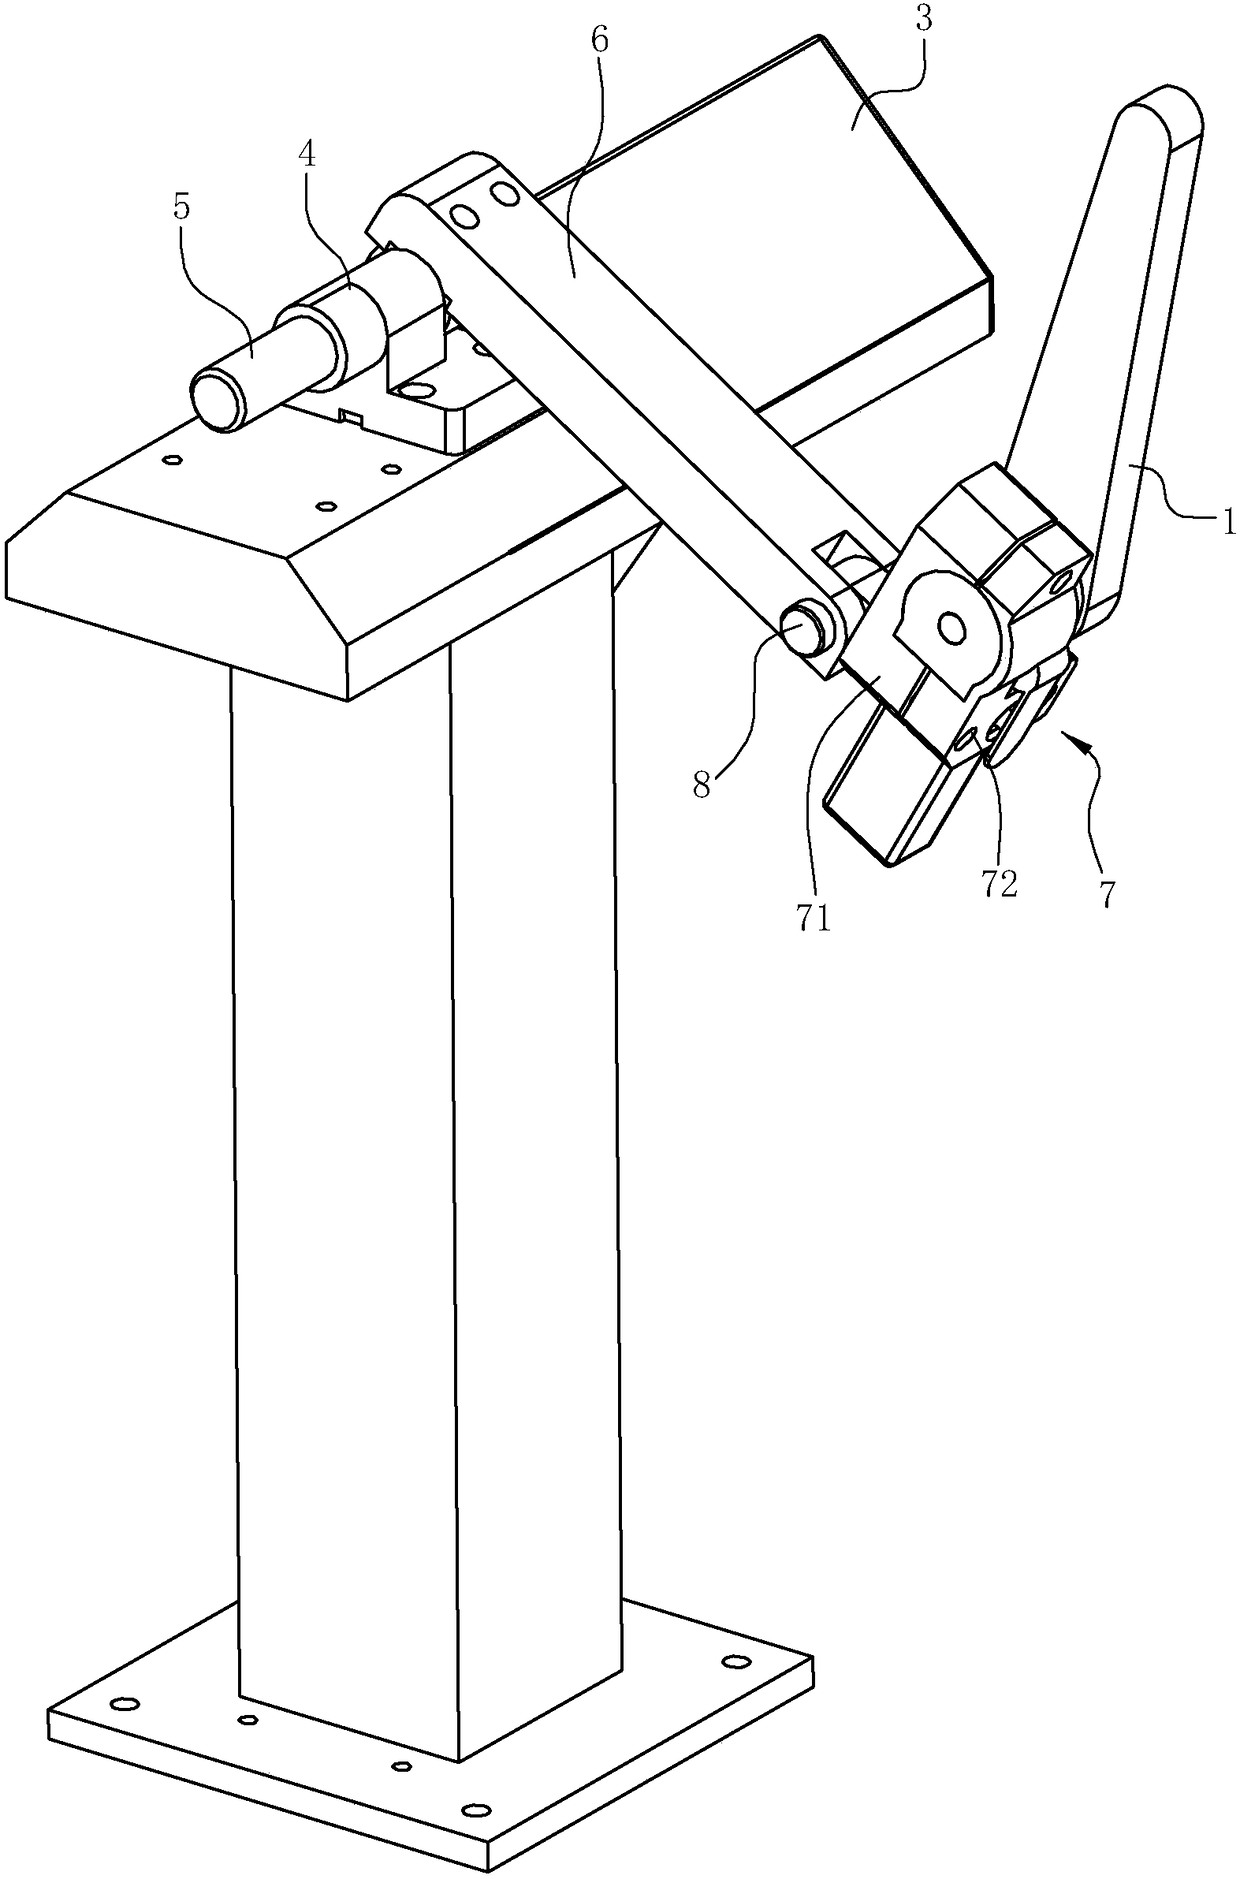 A fixed-size fillet grinding device